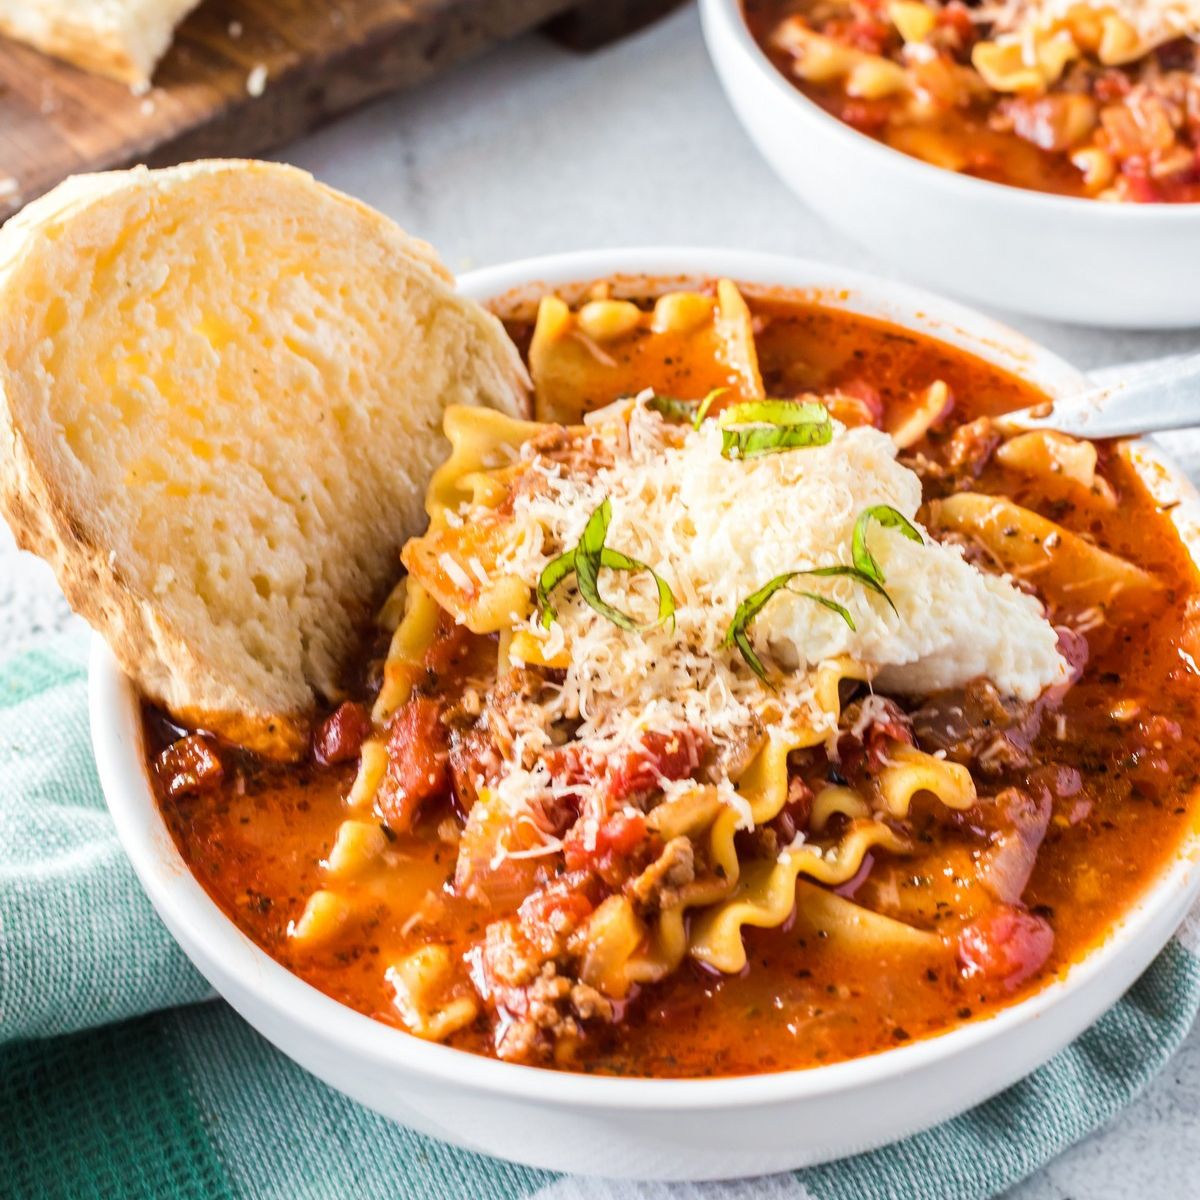 This Soup is My New Comfort Food 🥣 #easyrecipes #lasagnasoup